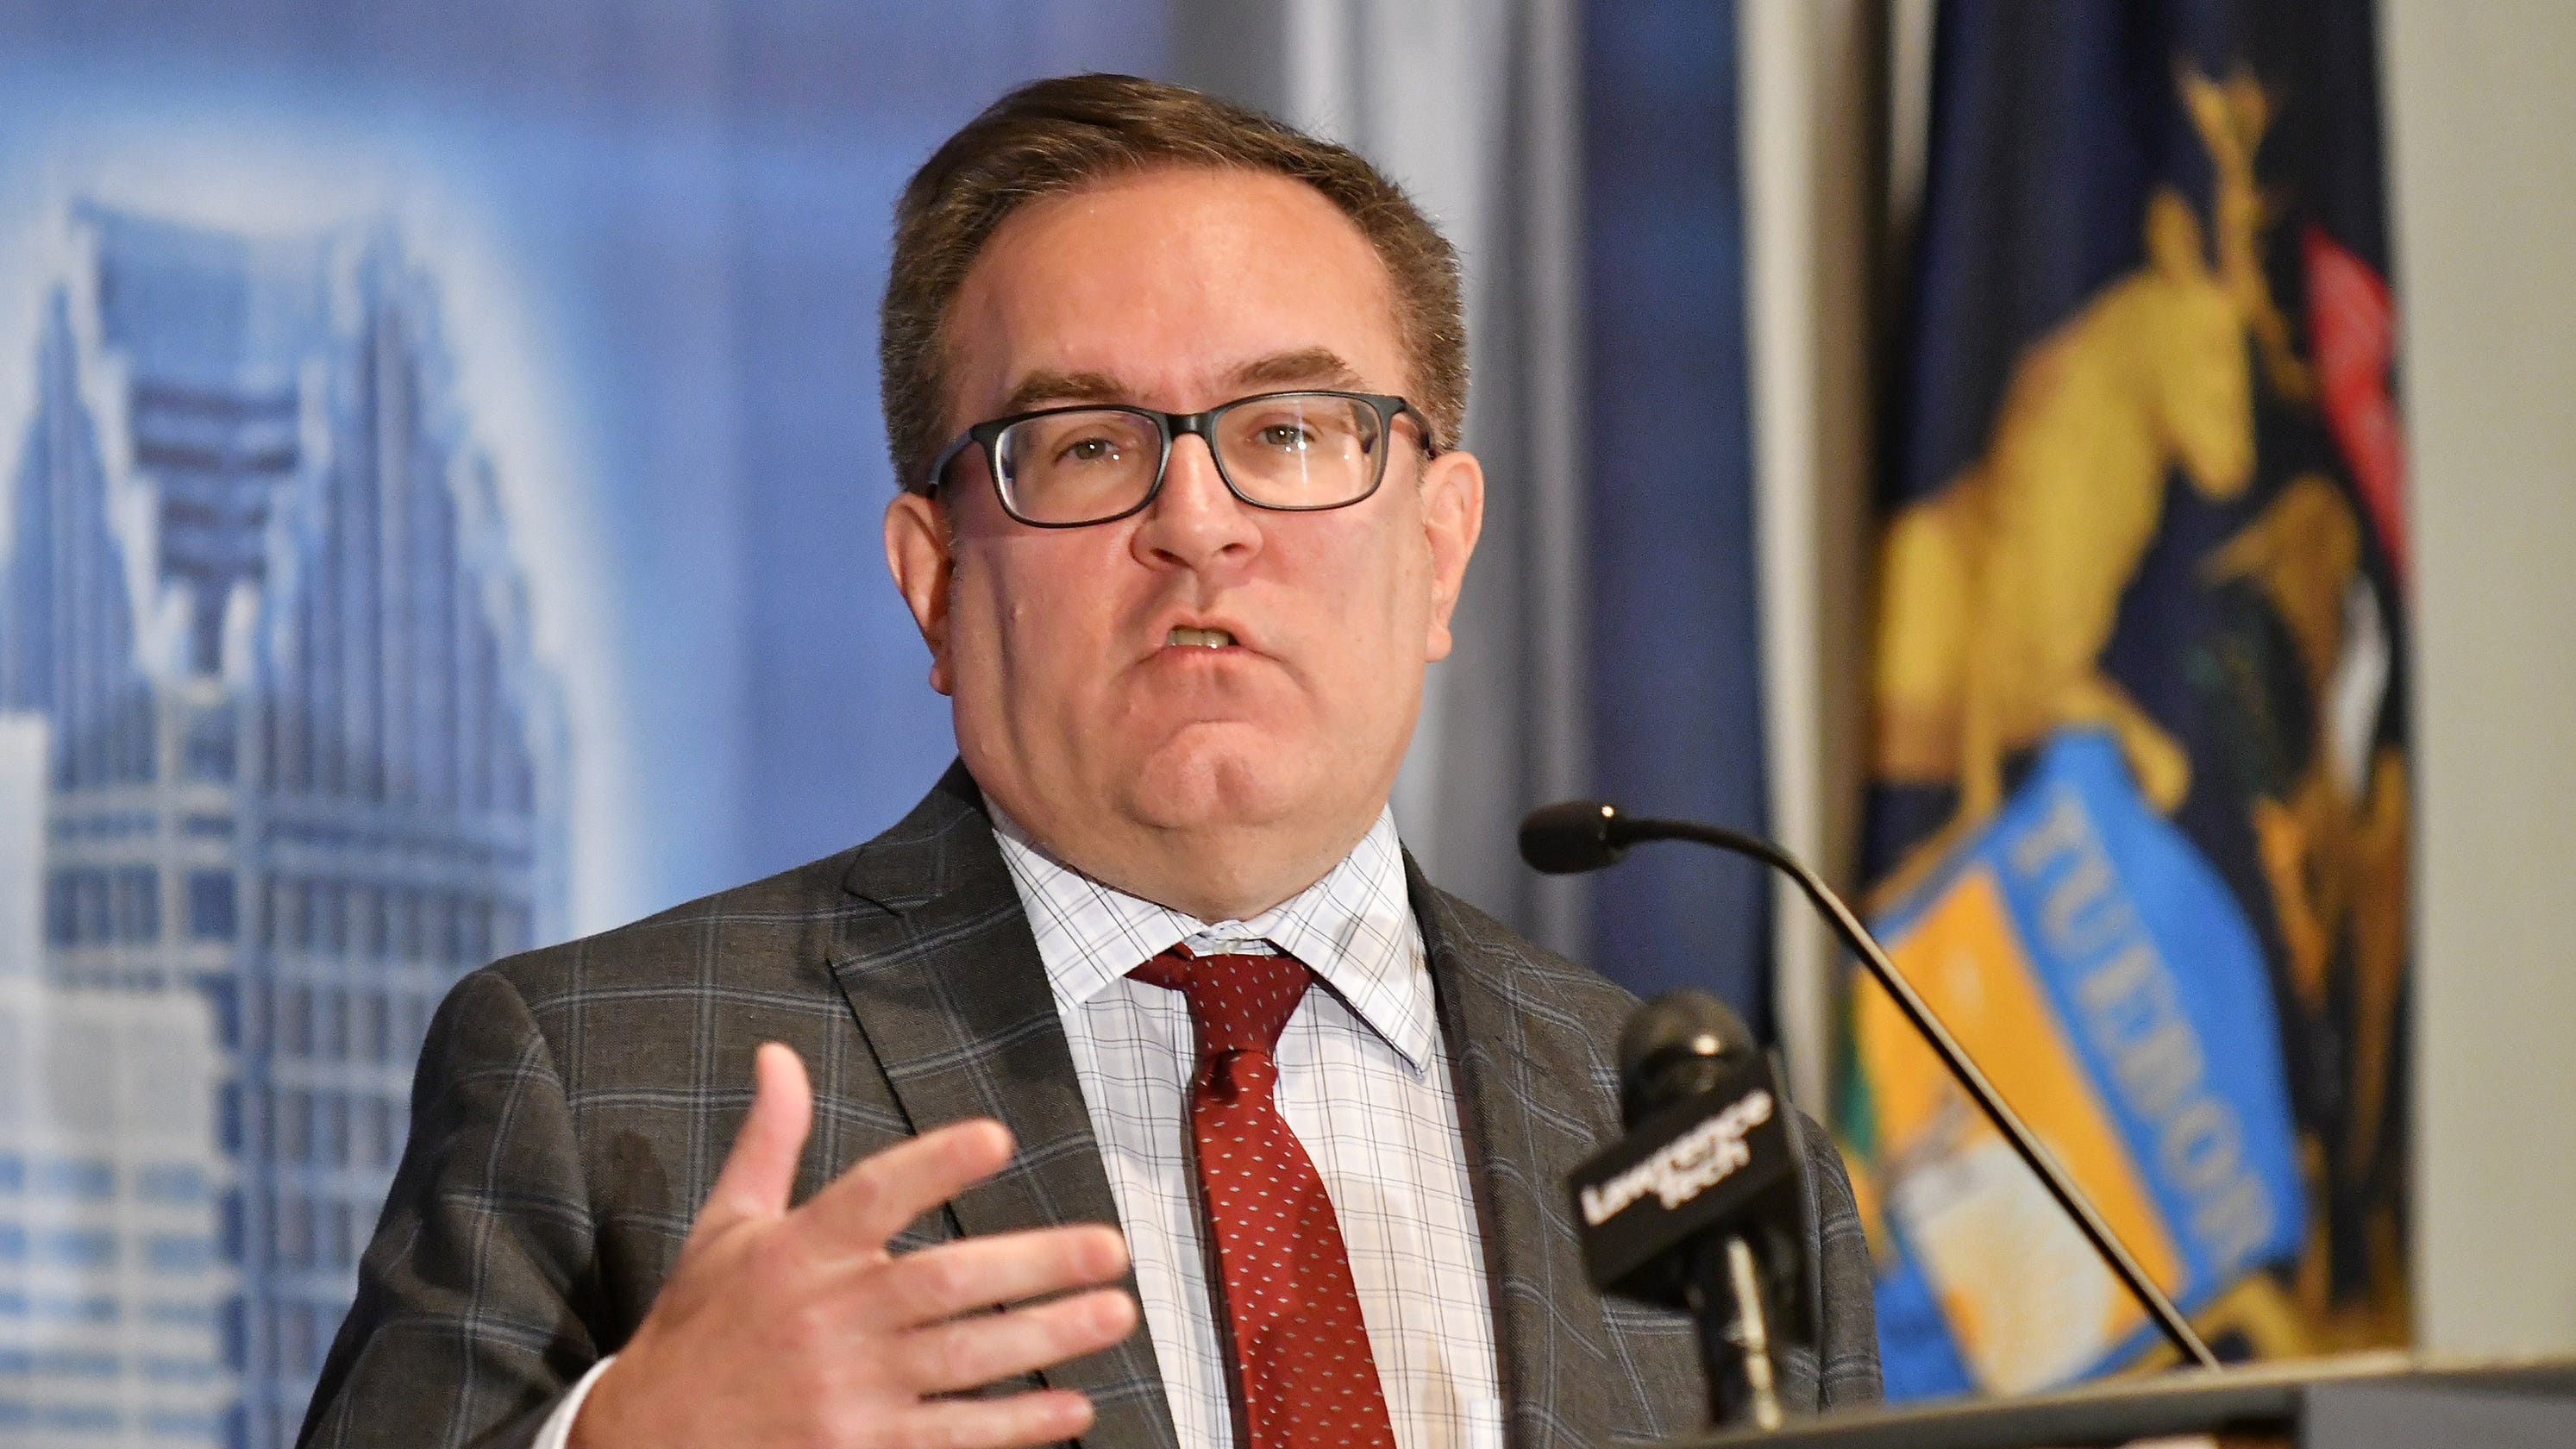 Wheeler: EPA can clean air, water while reducing costs to businesses - The Detroit News